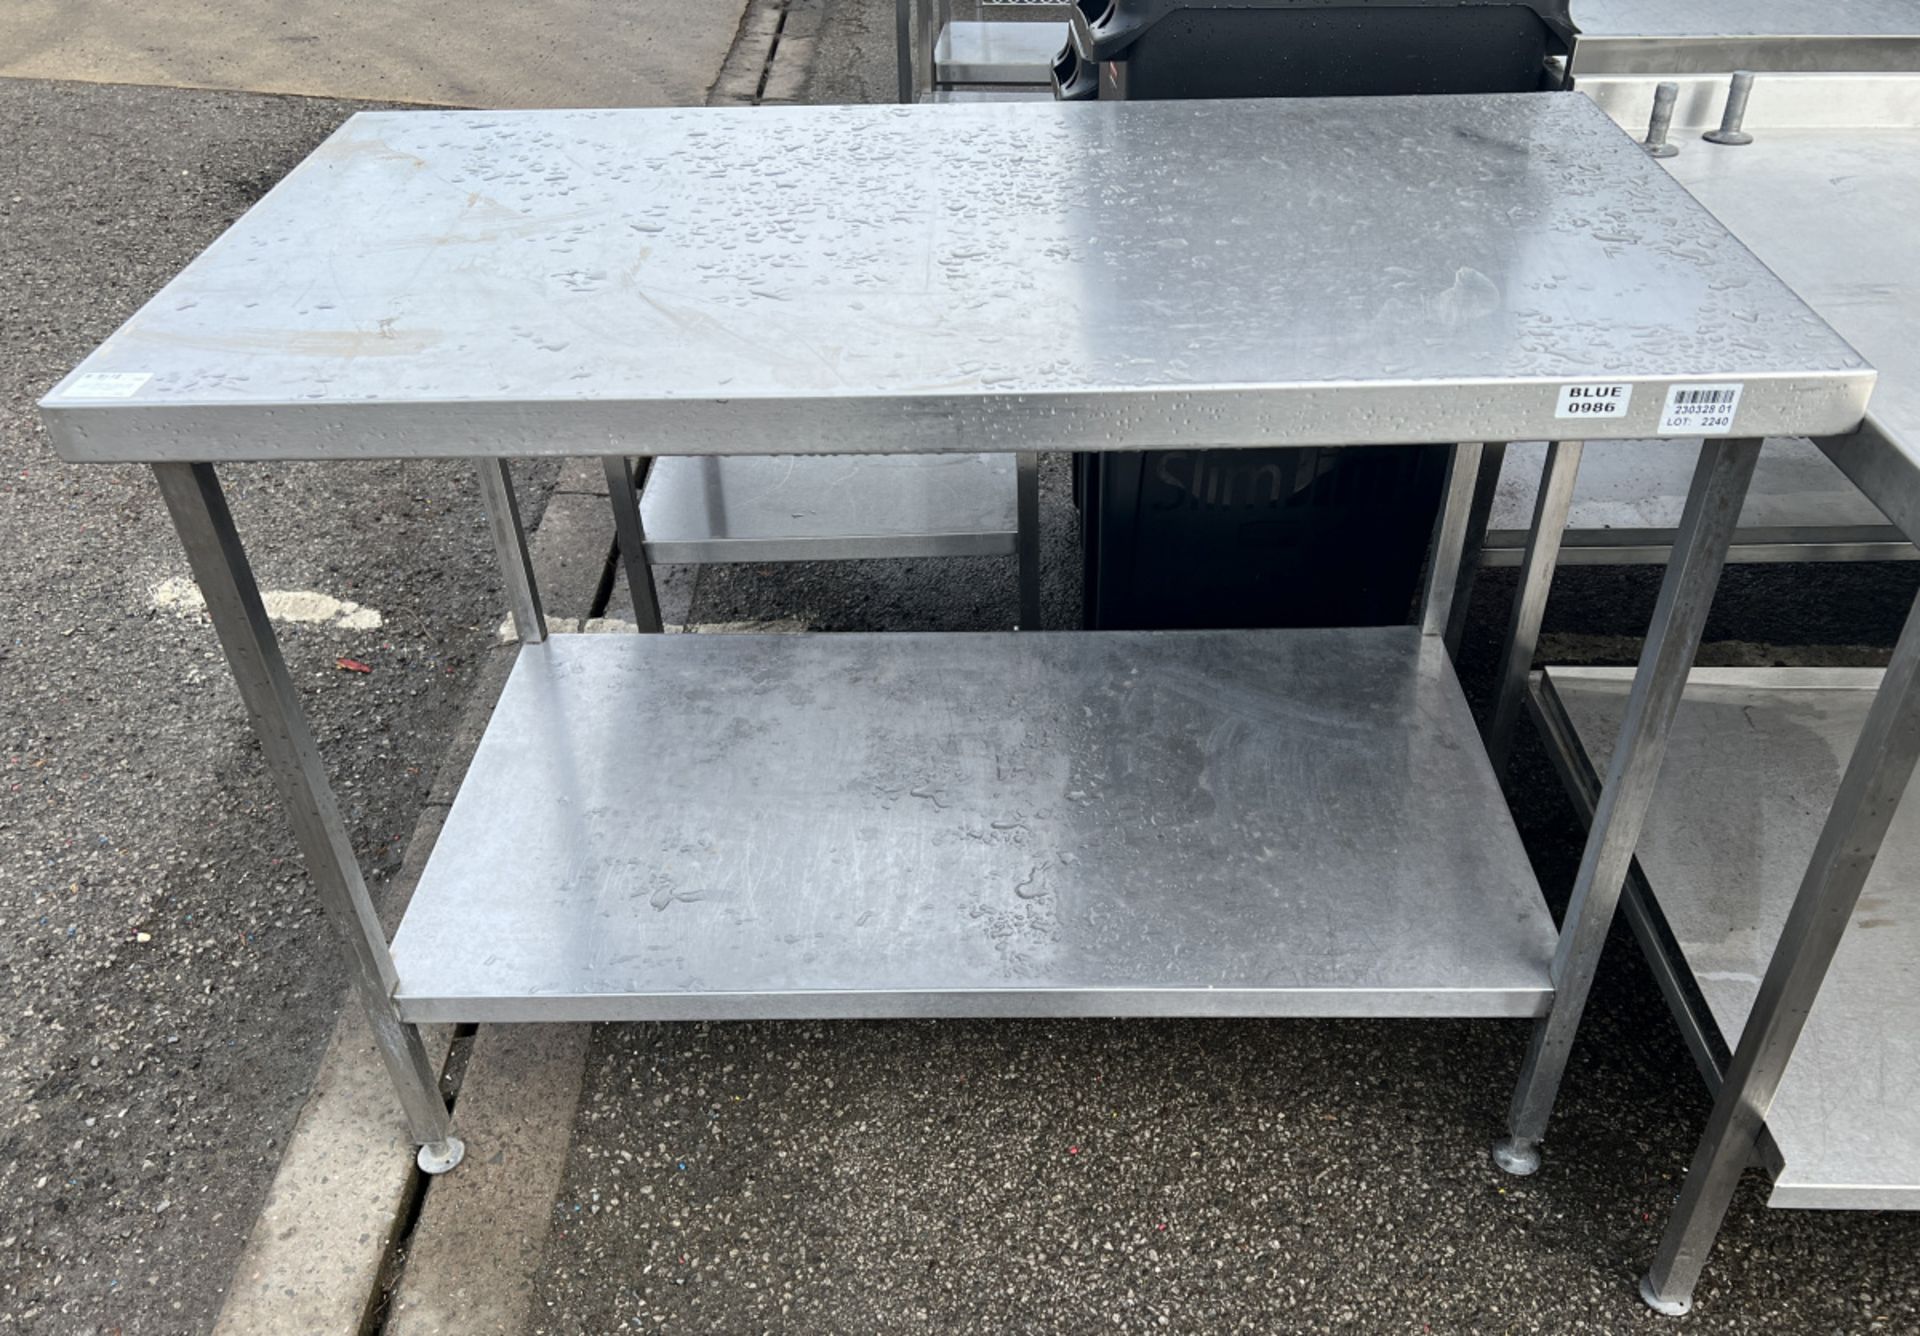 Stainless steel table with bottom shelf - dimensions: 130 x 70 x 90cm